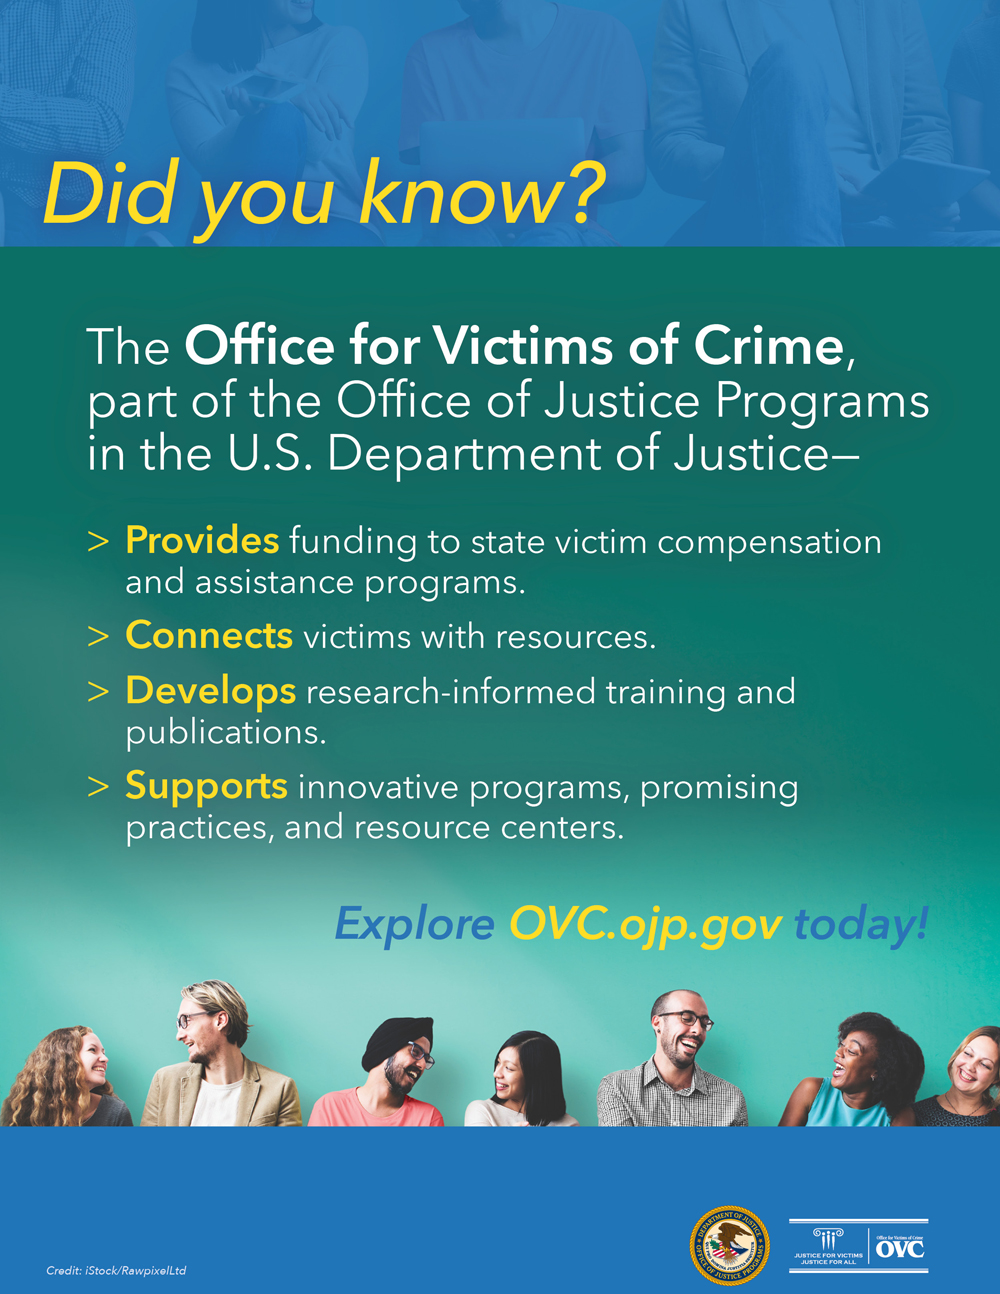 2022 National Crime Victims' Rights Week Awareness Poster - Did You Know?